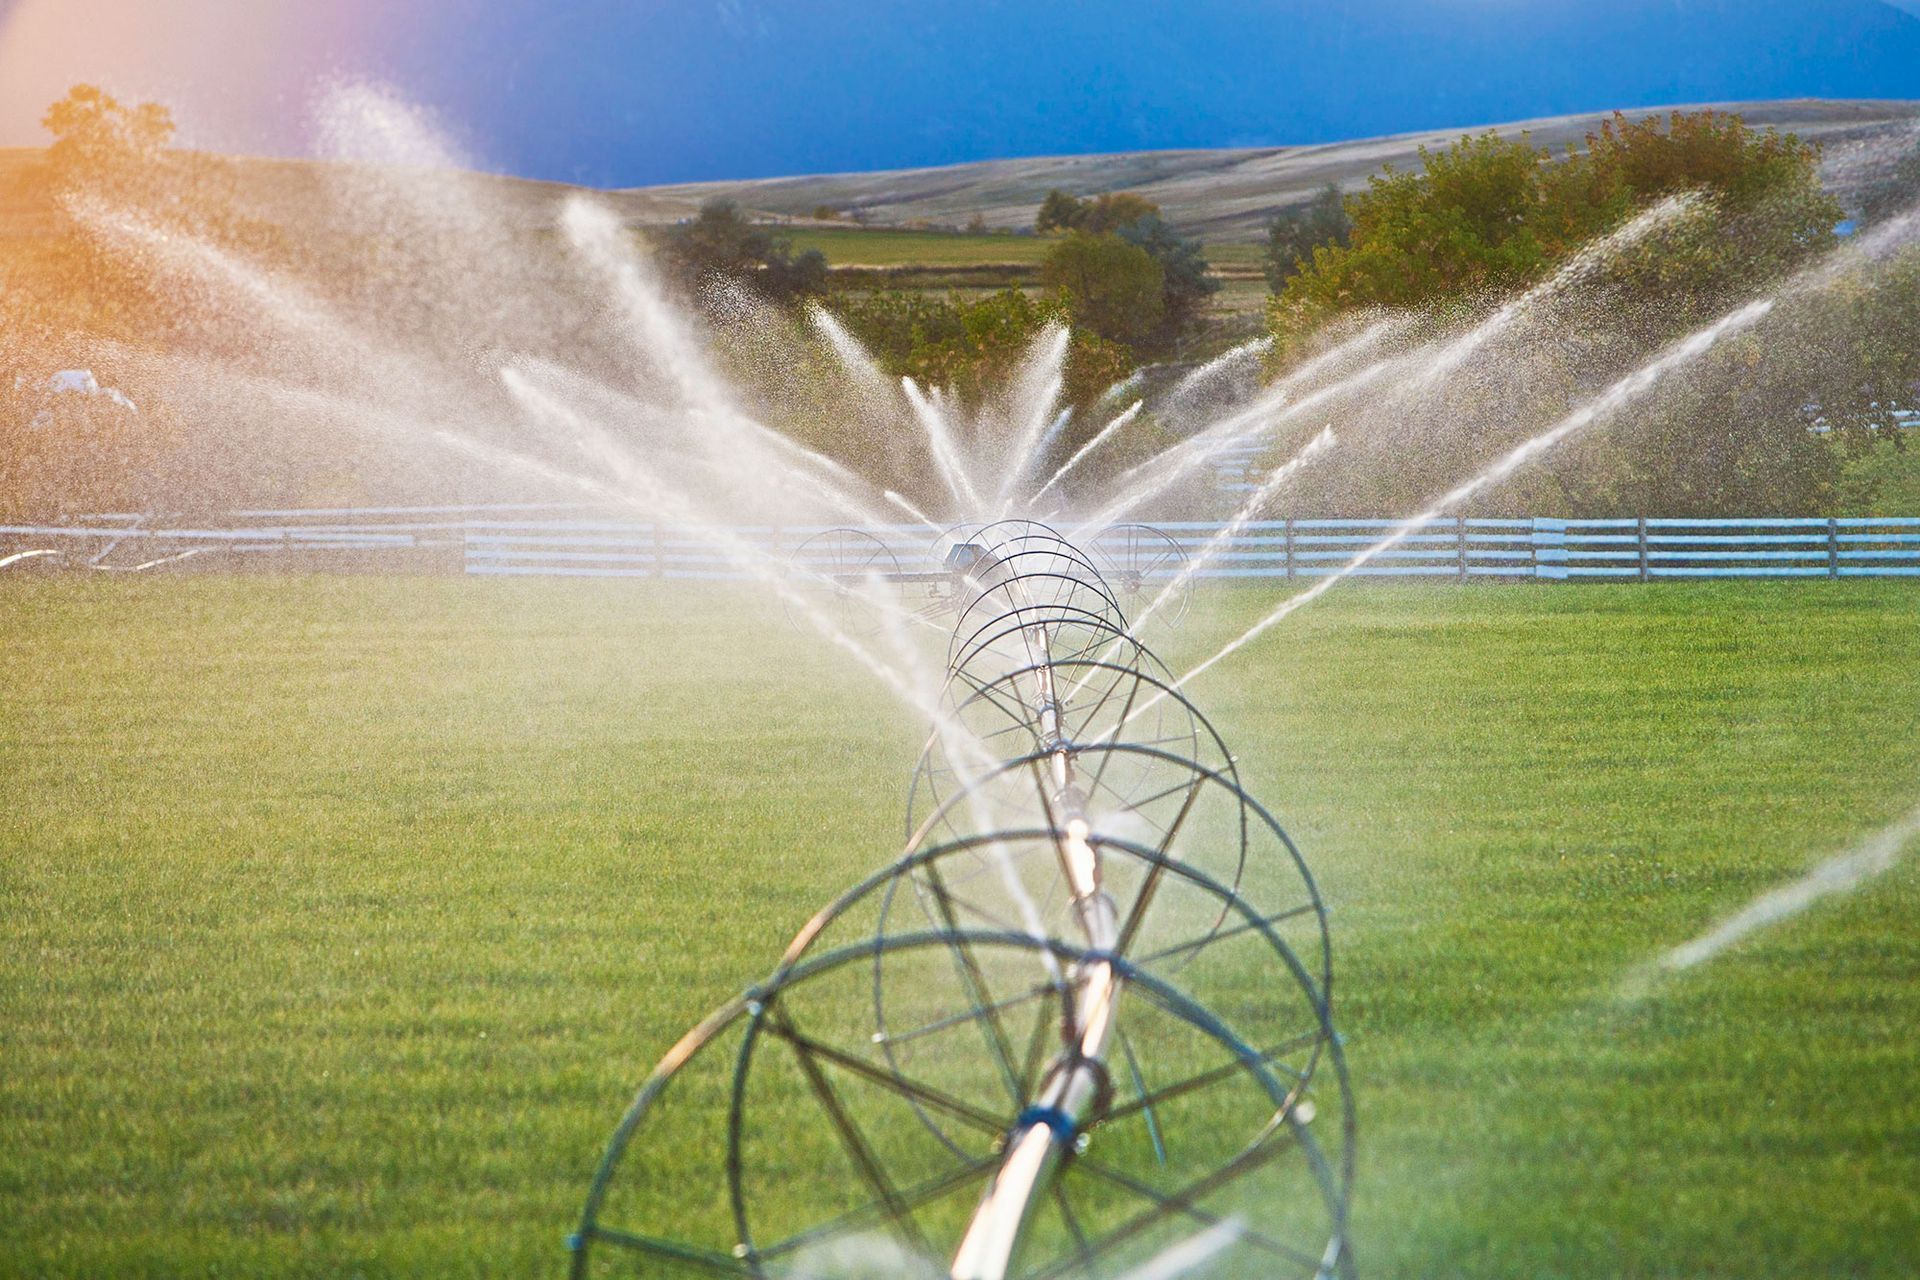 a sprinkler is spraying water on a lush green field